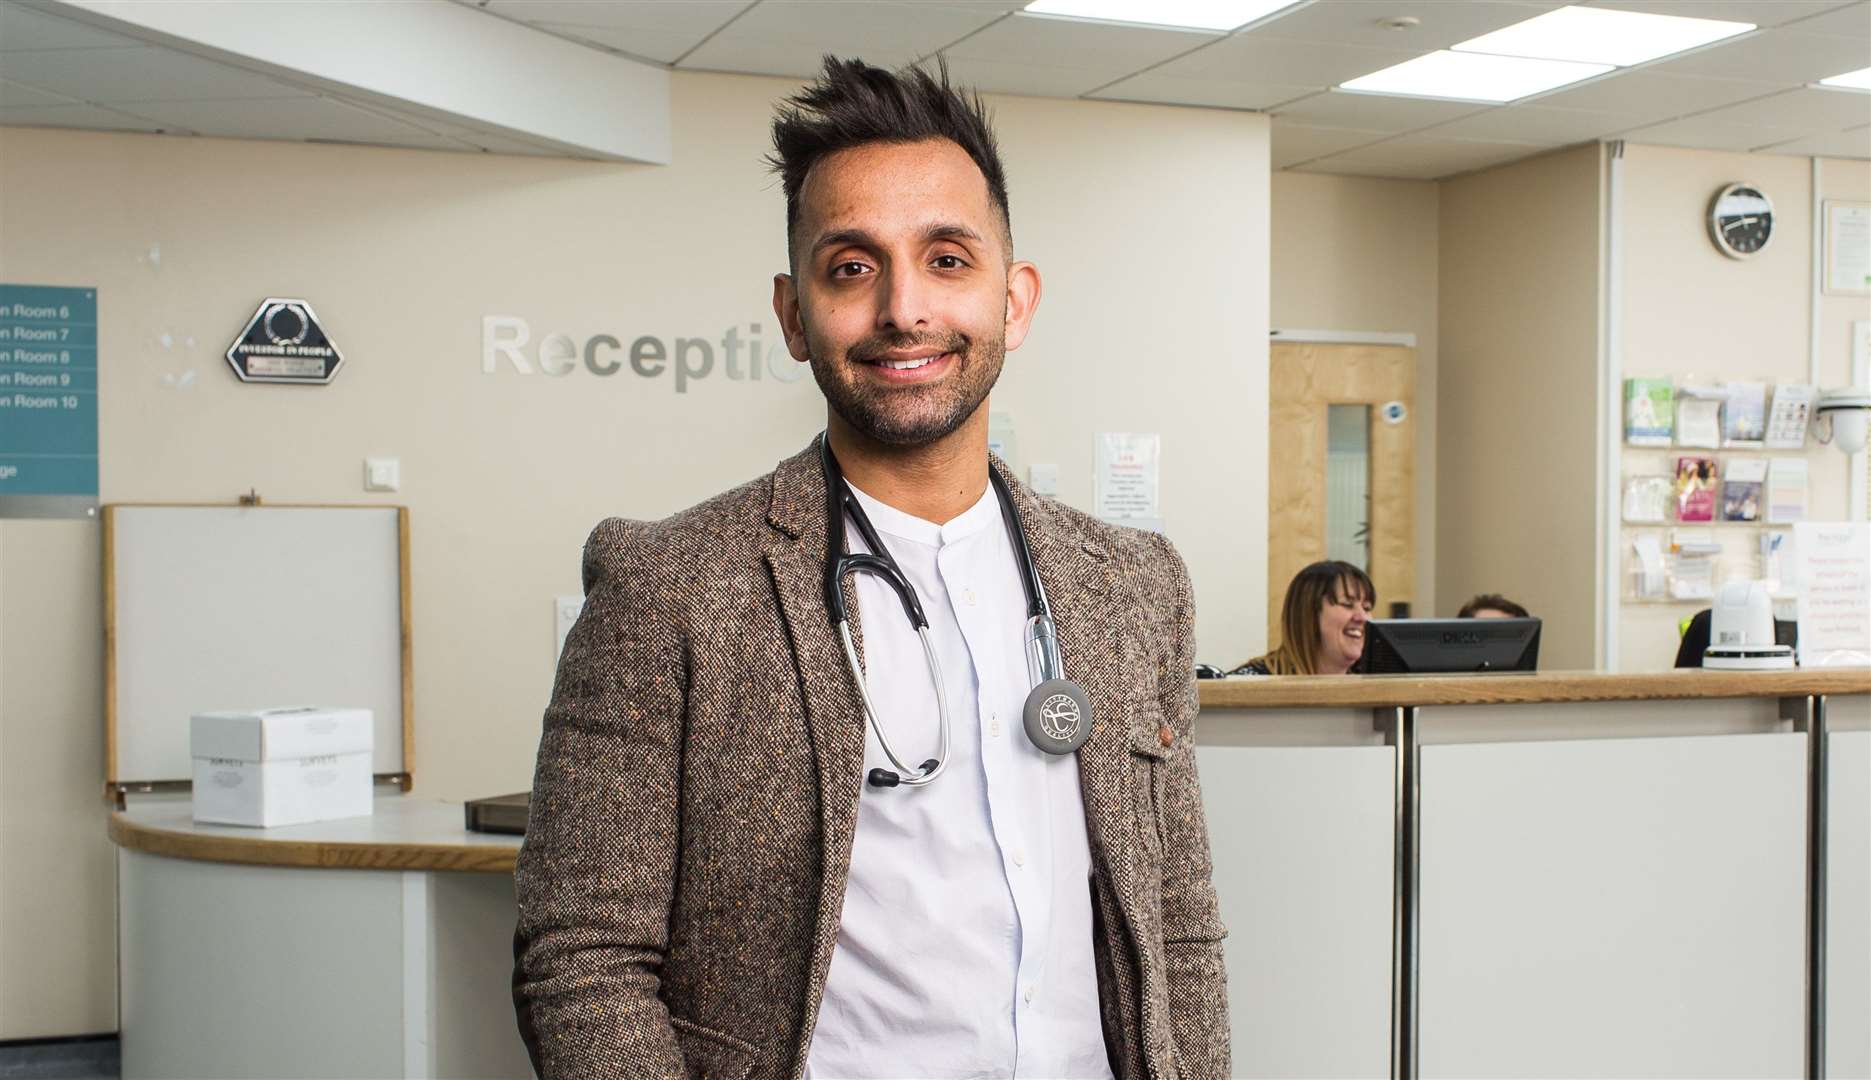 ‘EFFECTIVE’: Dr Amir Khan says rapid testing helps detect those who are infectious.